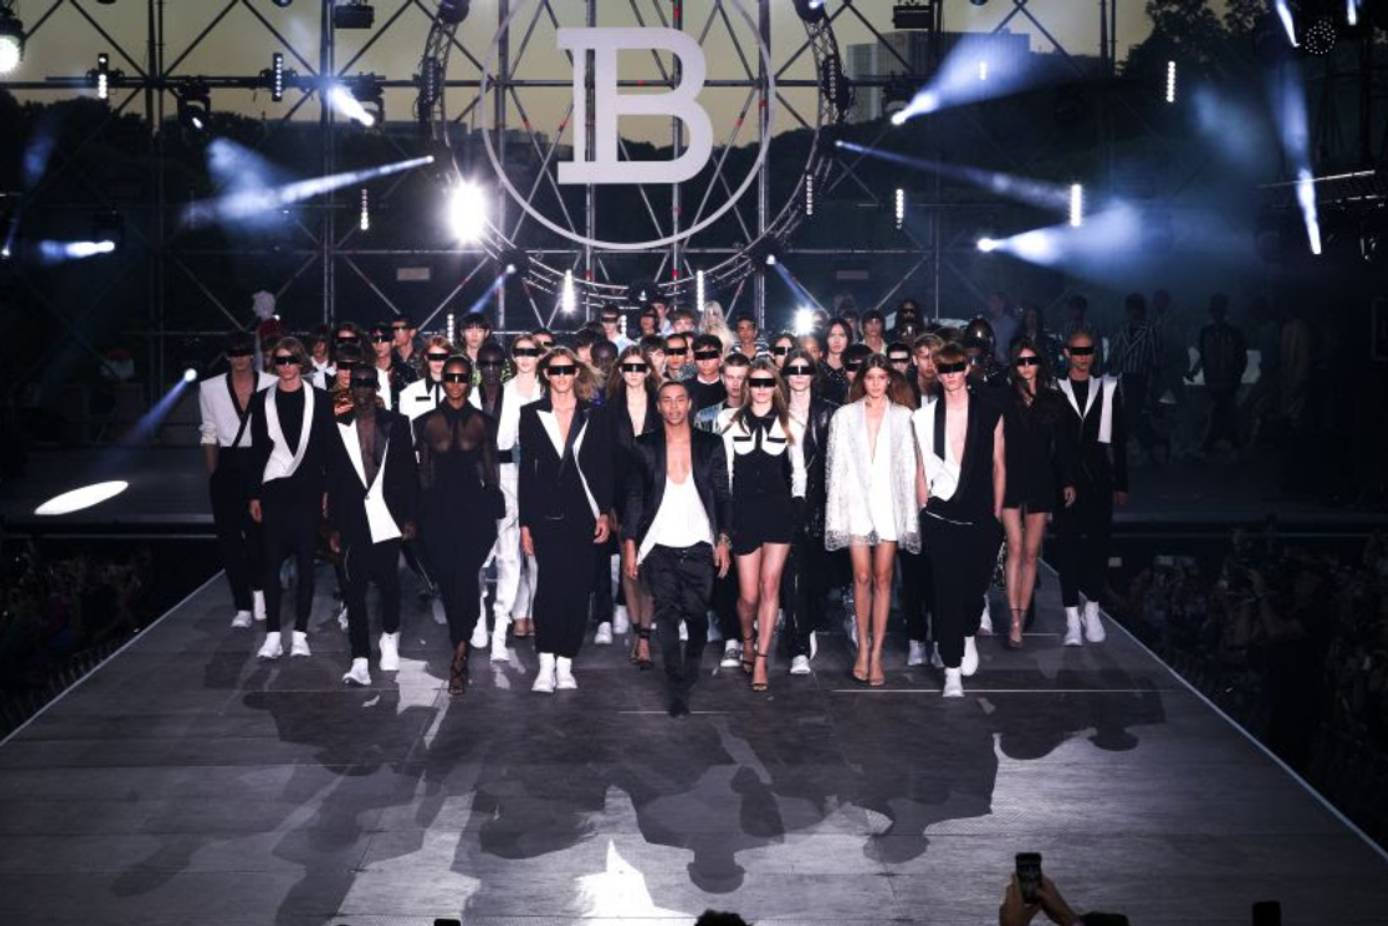 PFW Balmain holds benefit festival to new collection